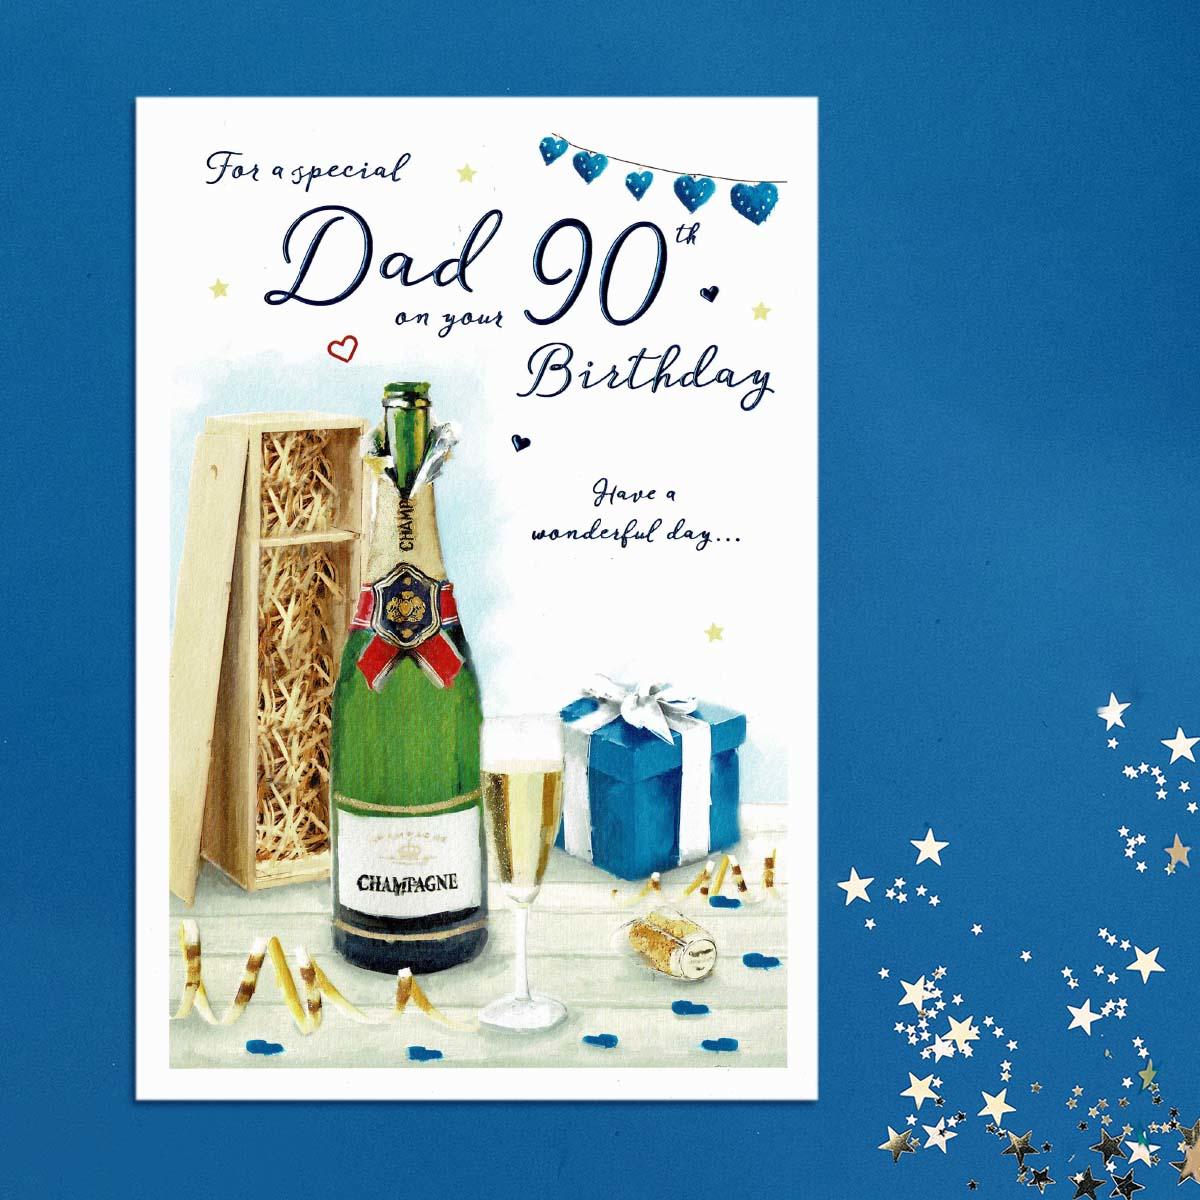 Special Dad 90th Birthday Card Alongside Its Blue Envelope